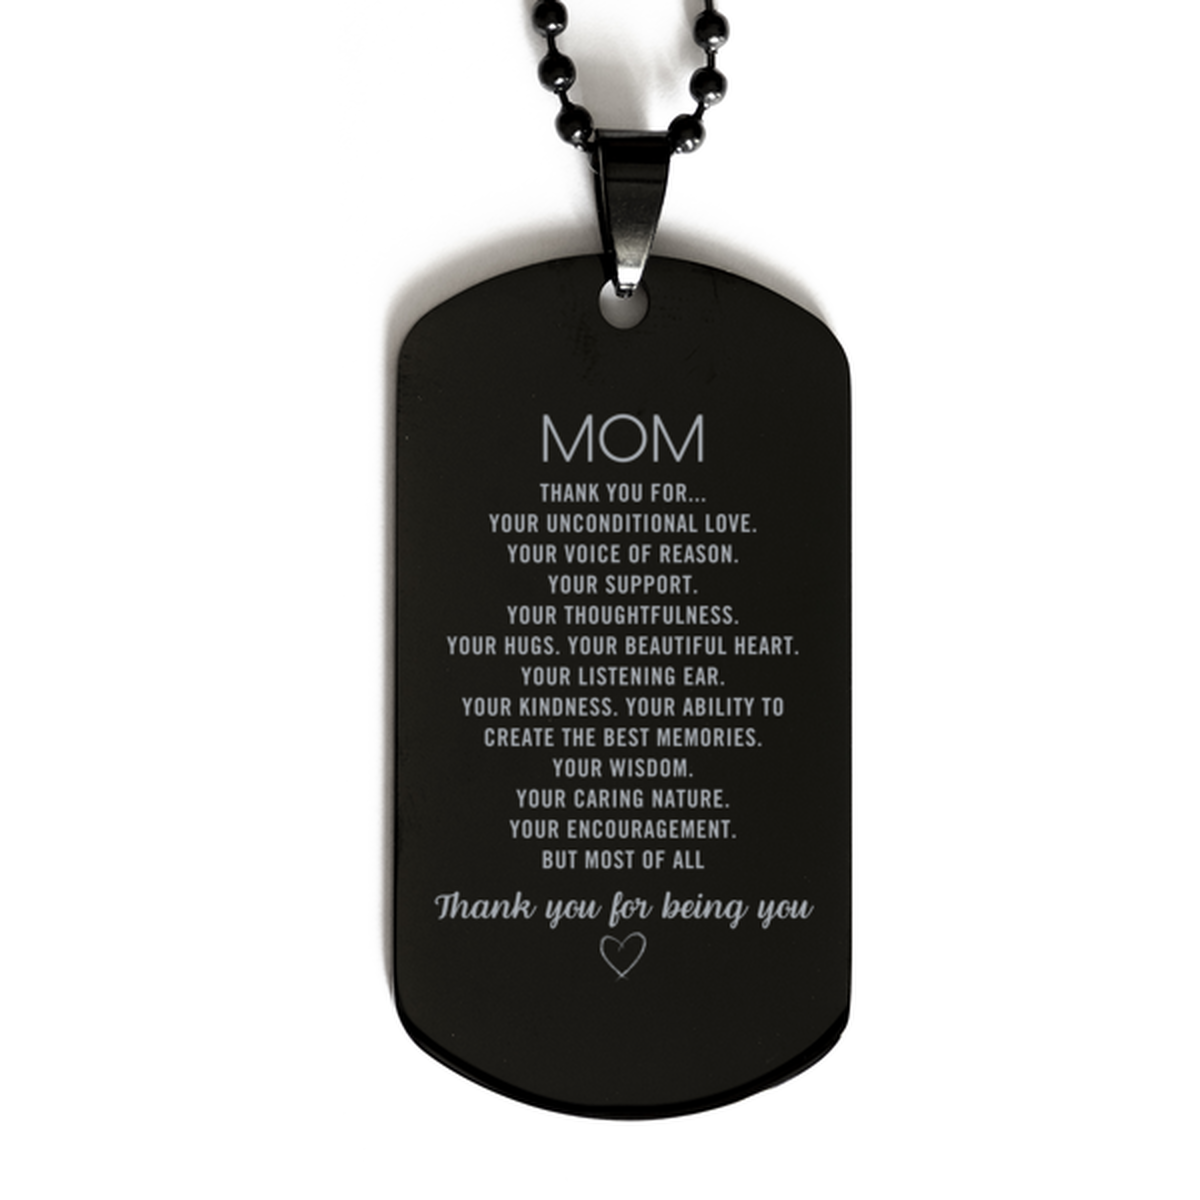 Mom Black Dog Tag Custom, Engraved Gifts For Mom Christmas Graduation Birthday Gifts for Men Women Mom Thank you for Your unconditional love